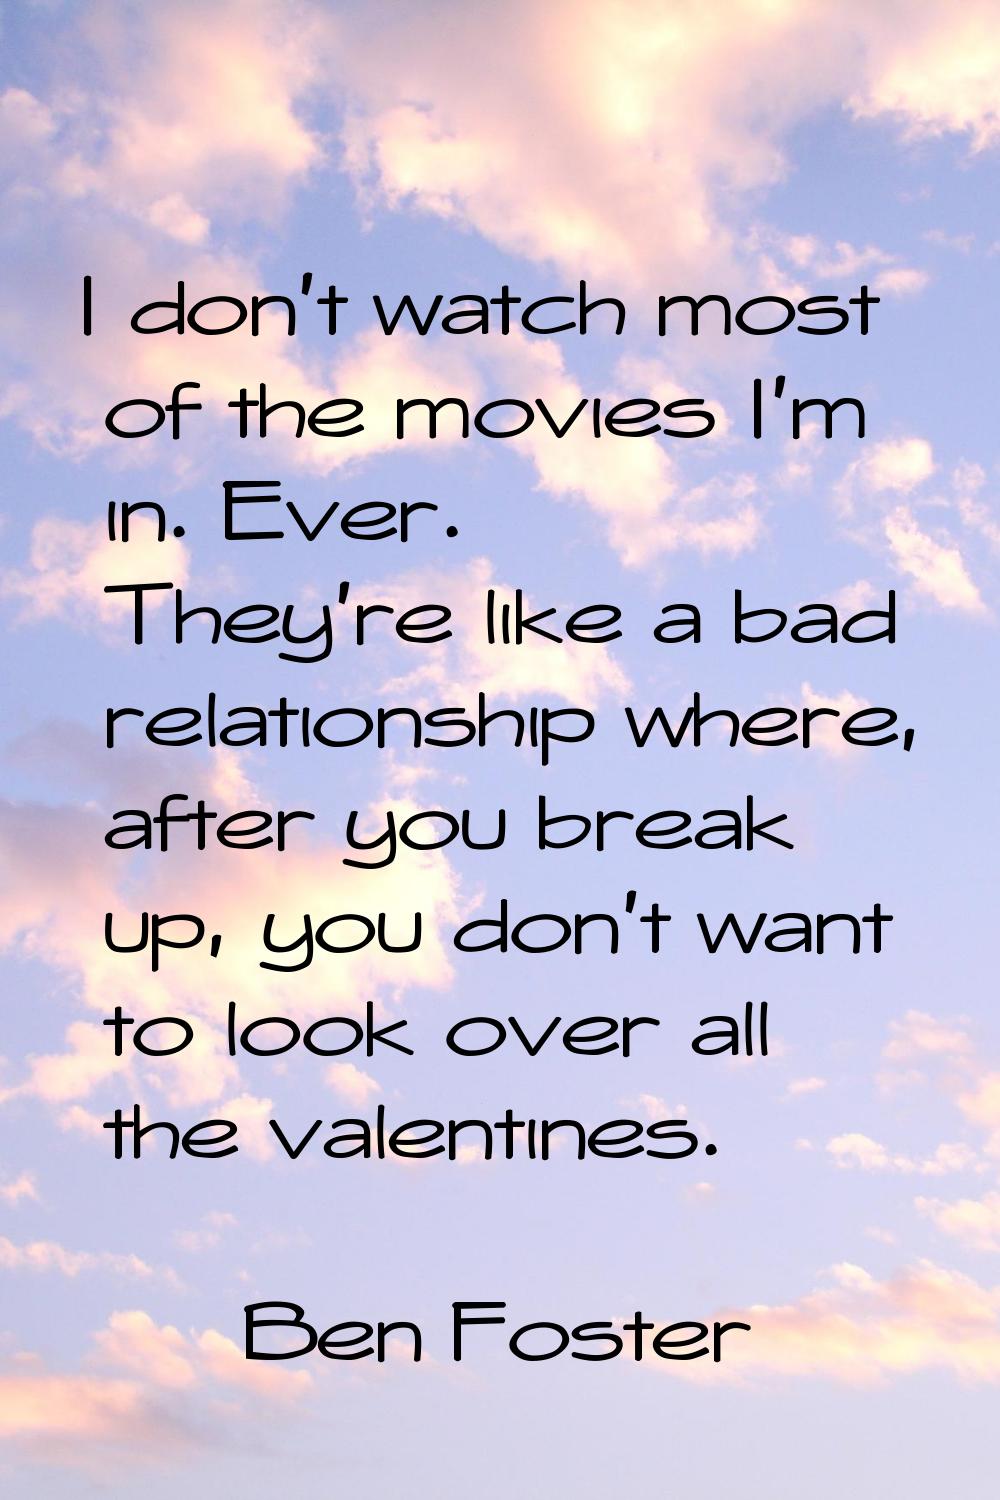 I don't watch most of the movies I'm in. Ever. They're like a bad relationship where, after you bre